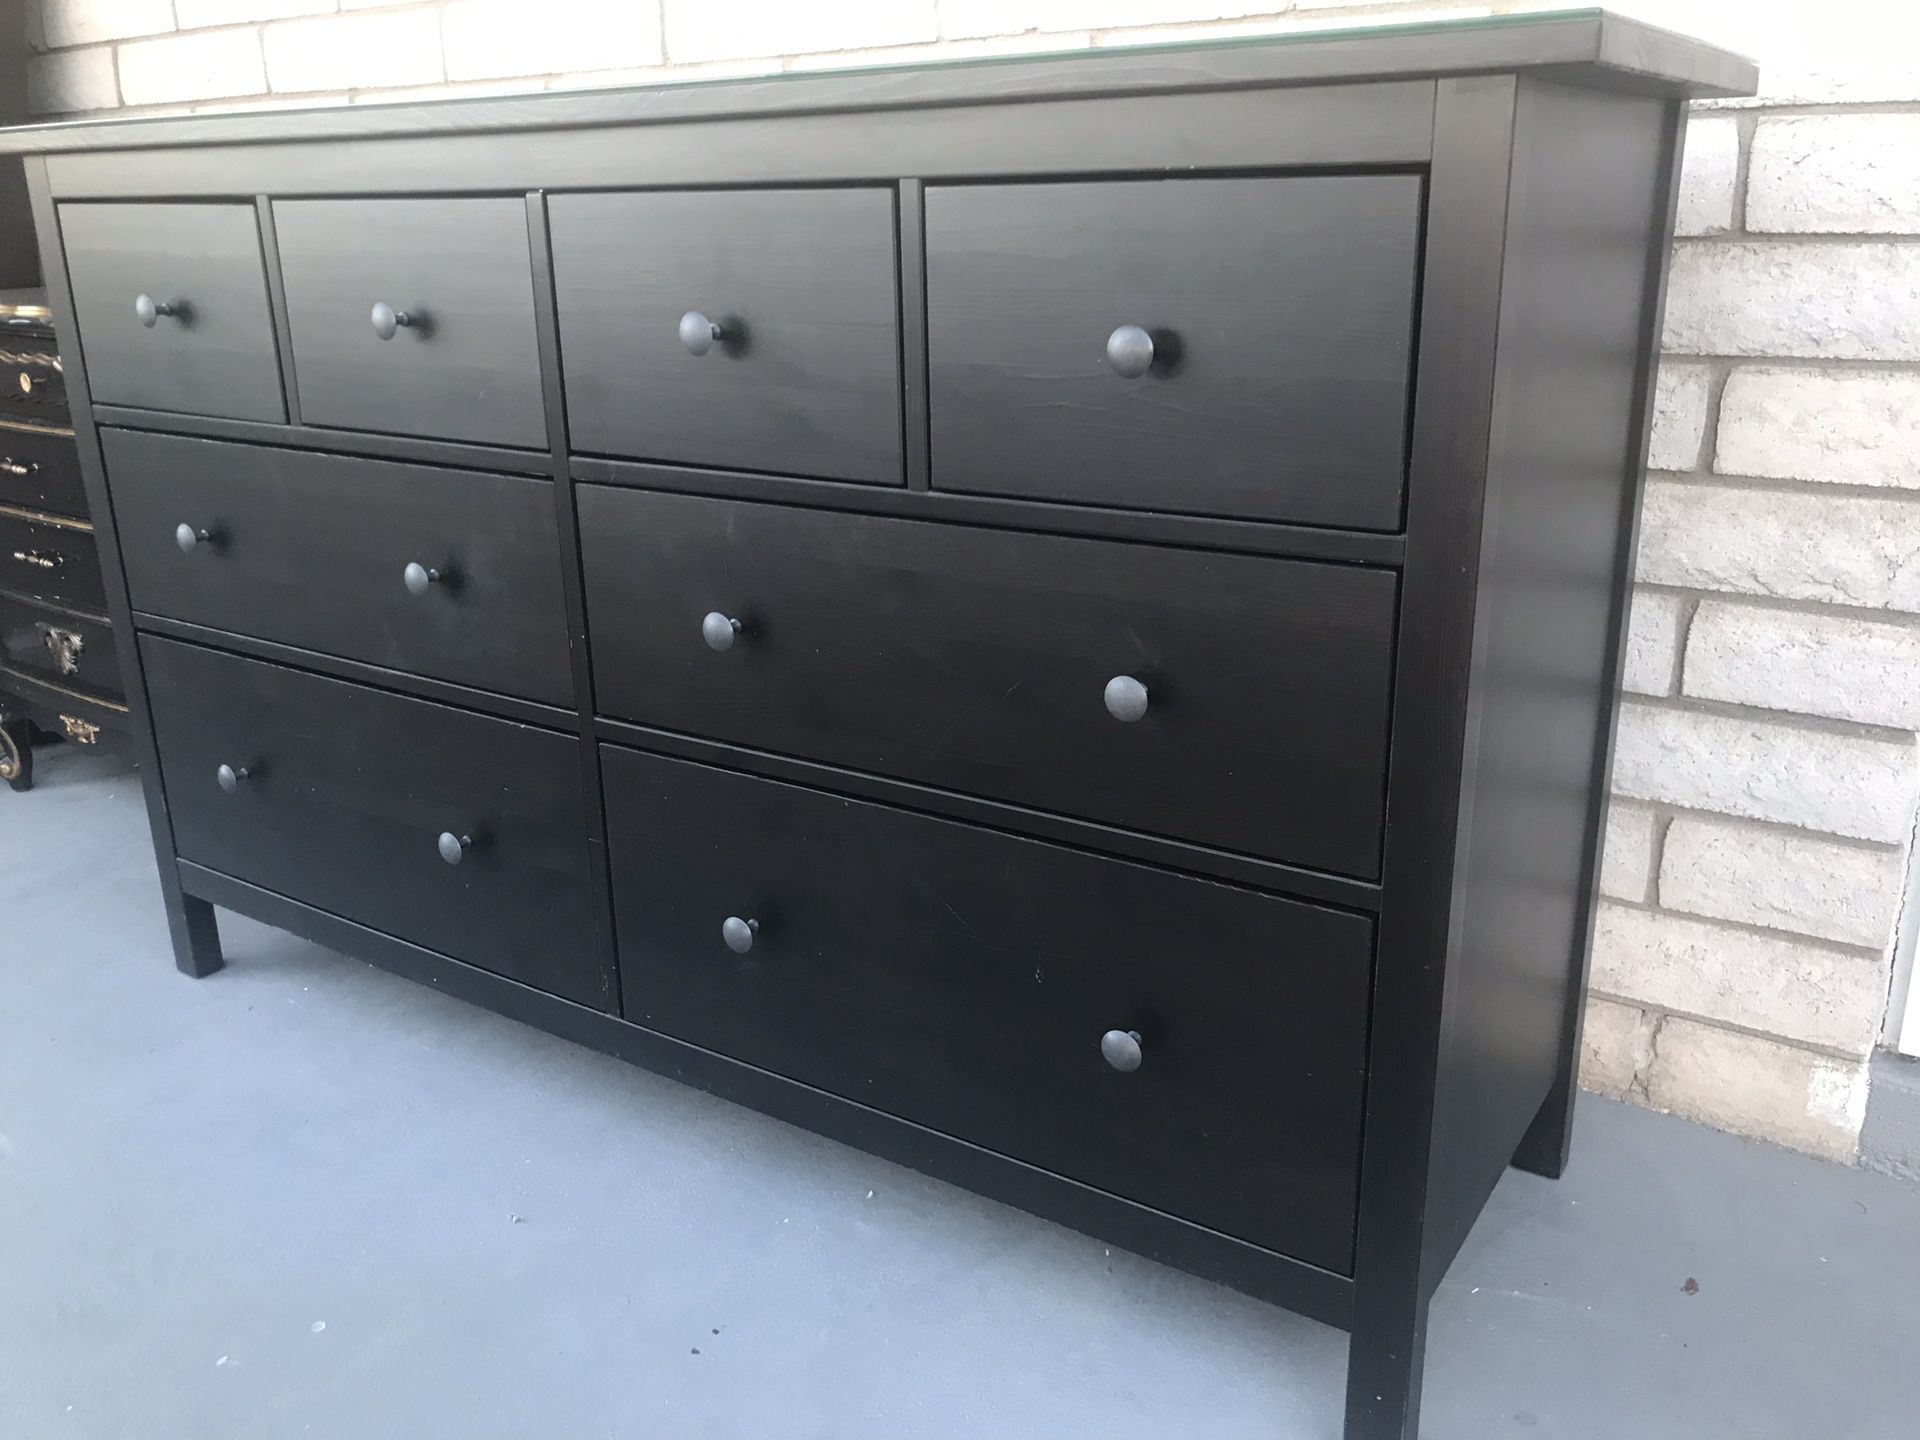 Dresser ikea good condition tap glass good condition